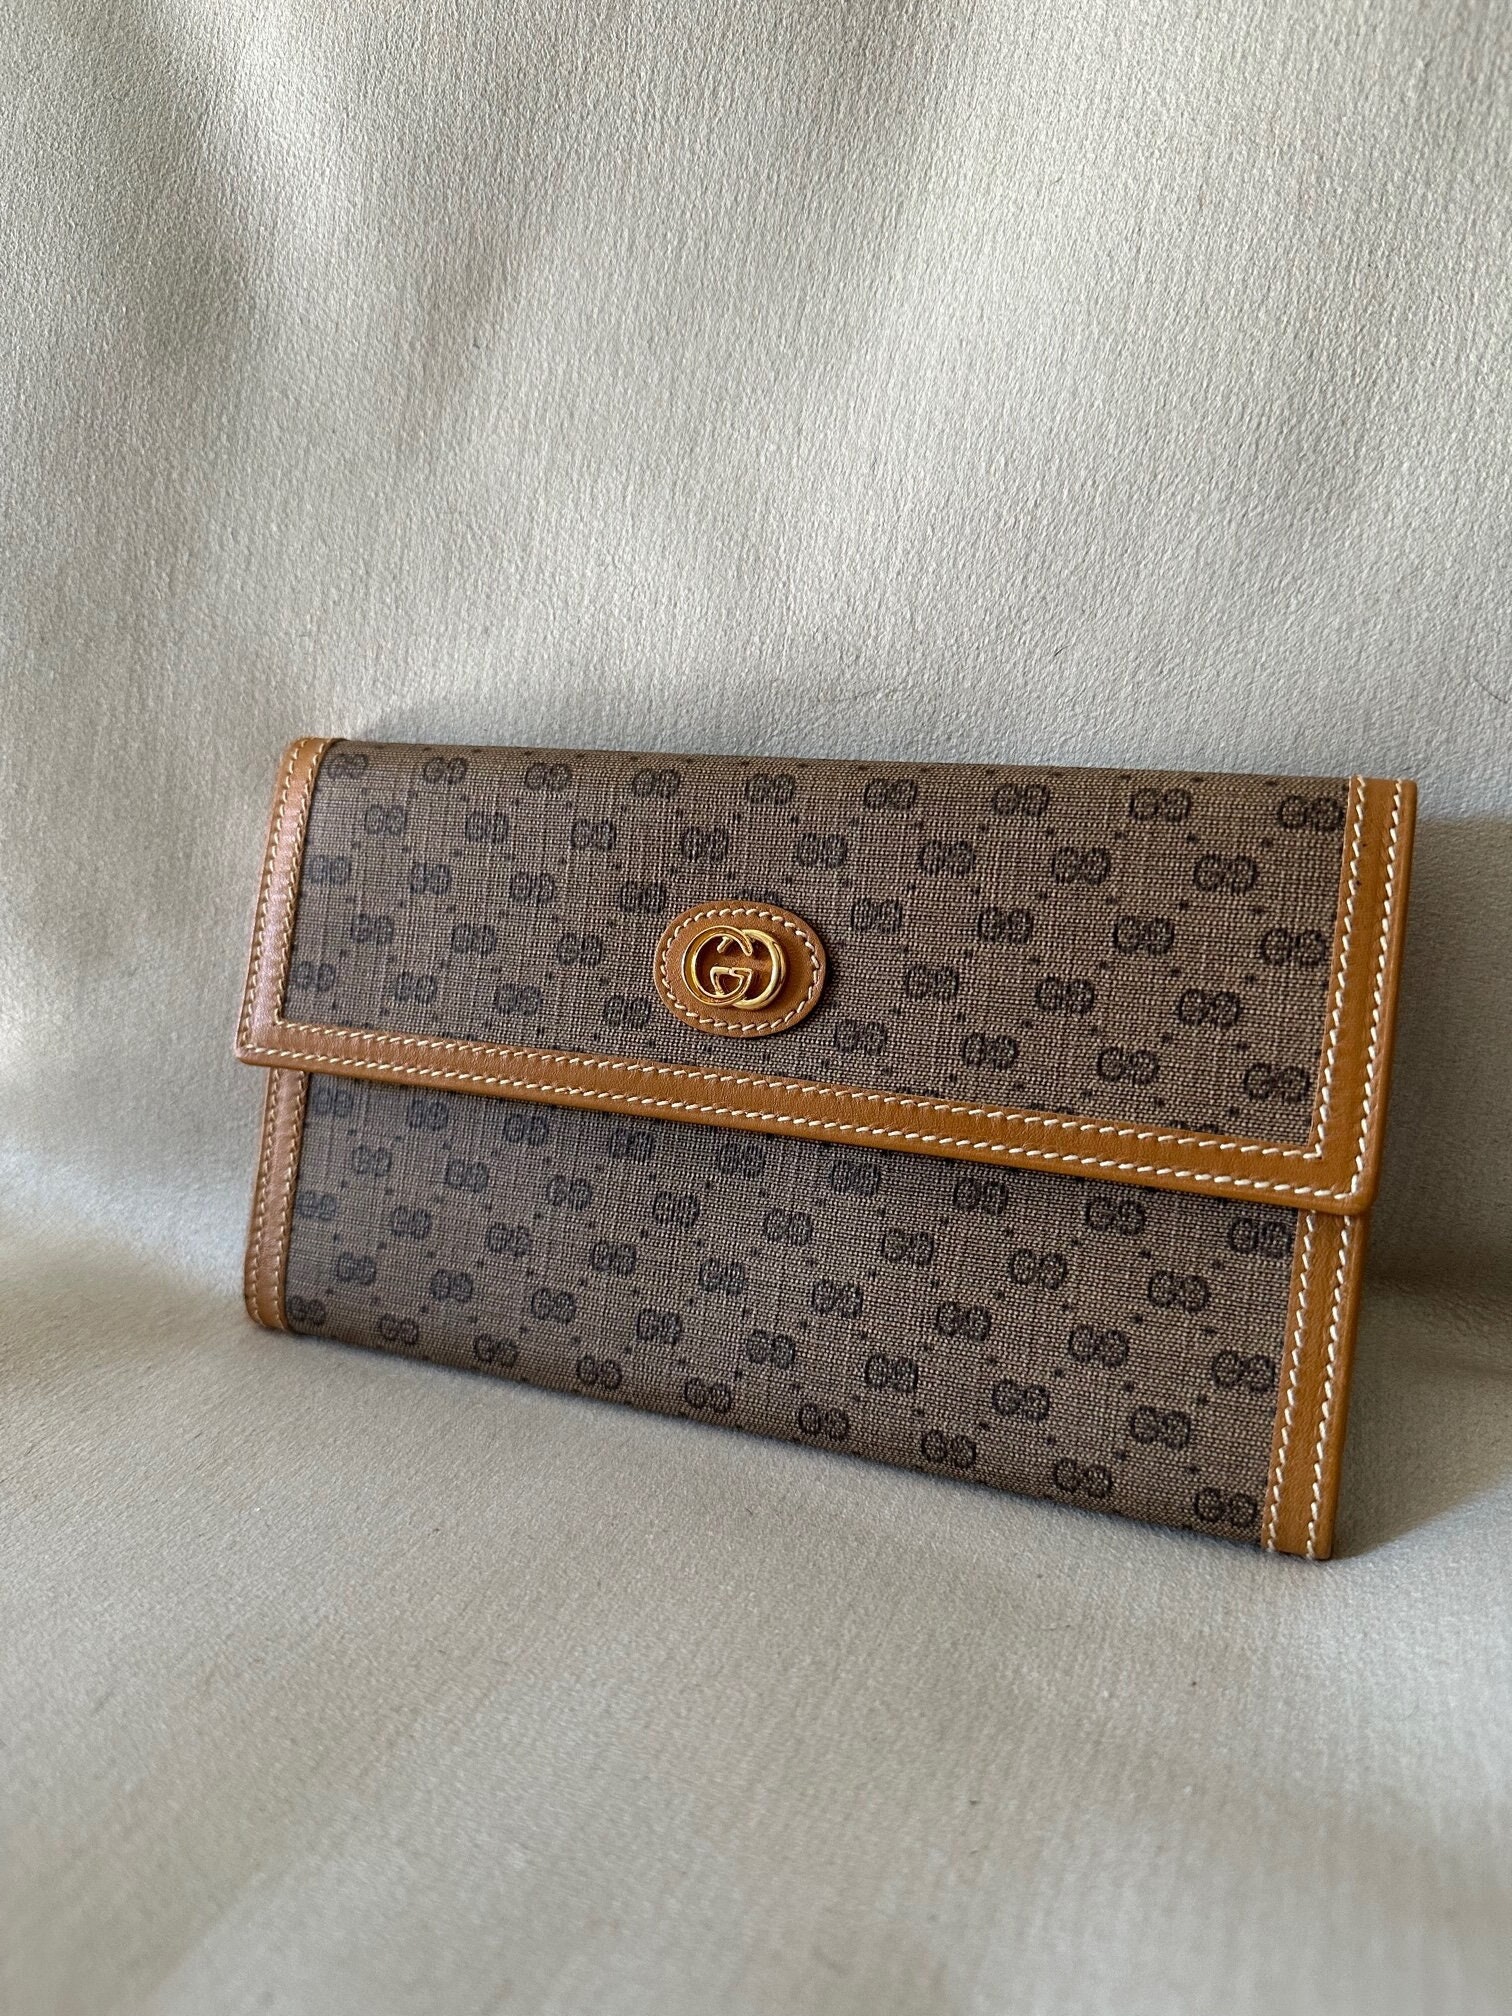 Vintage Gucci Wallet in Box Coated Canvas Camel Leather